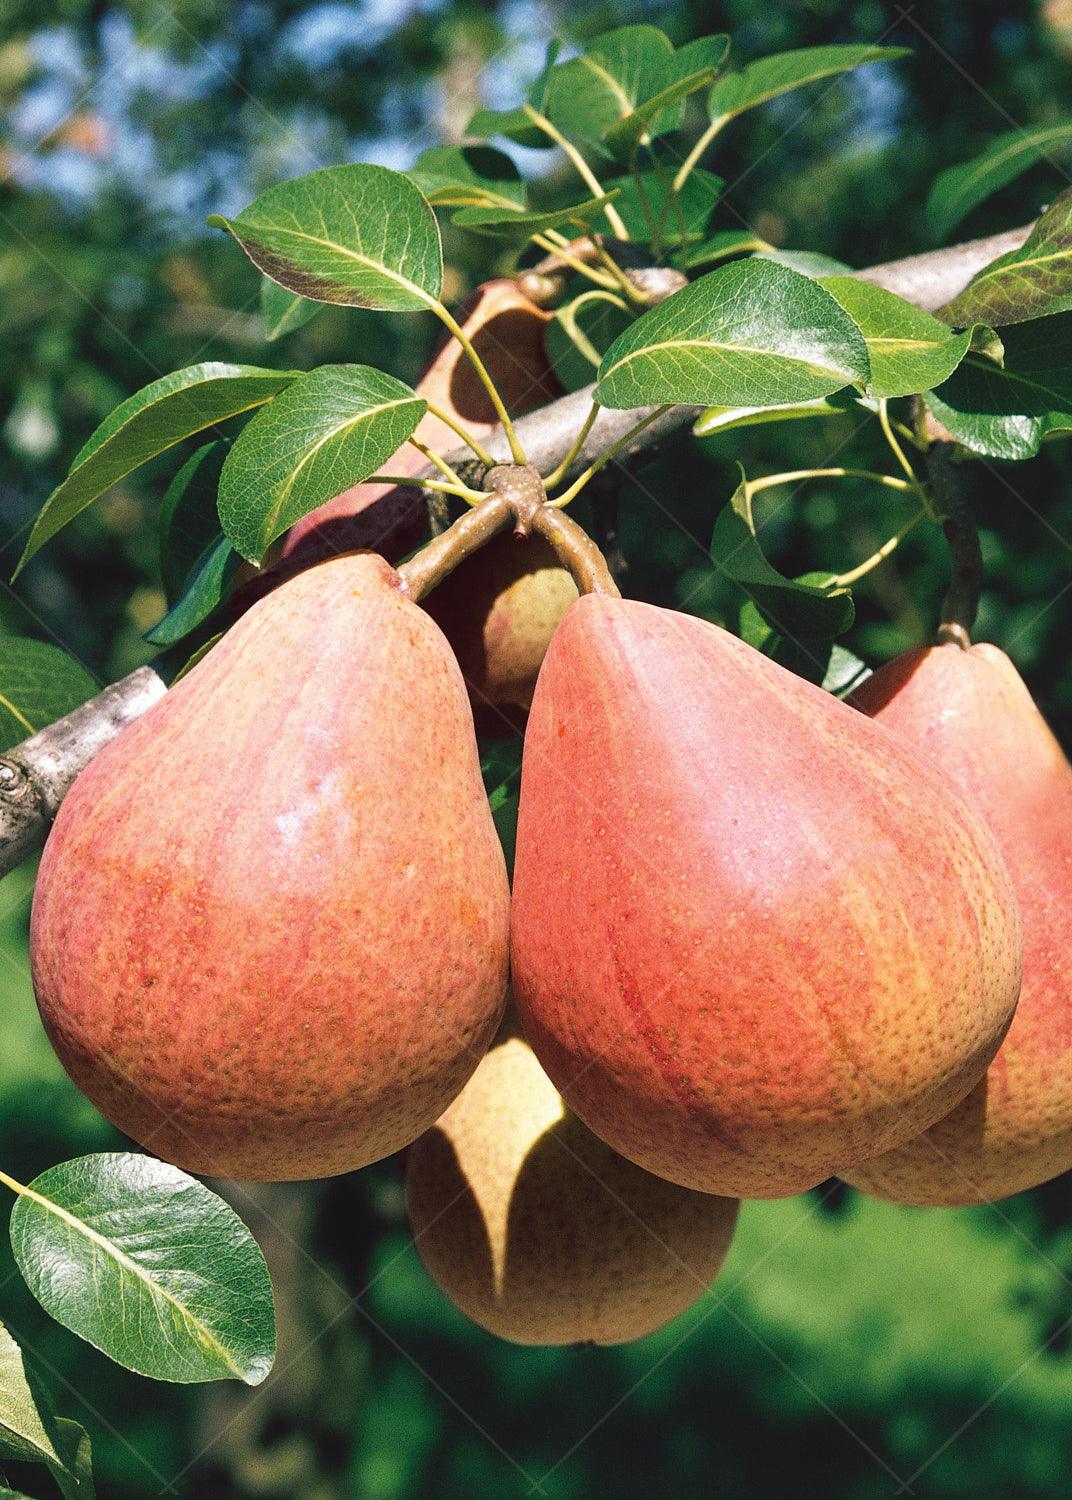 This dwarf tree bears striking deep red pears with a sweet and delicious flavor, reaching their peak ripeness in late summer. With a growth range suitable for zones 5 to 7, this pear tree thrives in milder climates, making it an excellent choice for regions with moderately cold winters. Savor the luscious and flavorful pears straight from your own backyard, and let the Red Clapp's Pear Dwarf Tree enhance your outdoor space with its beauty and bountiful harvest.